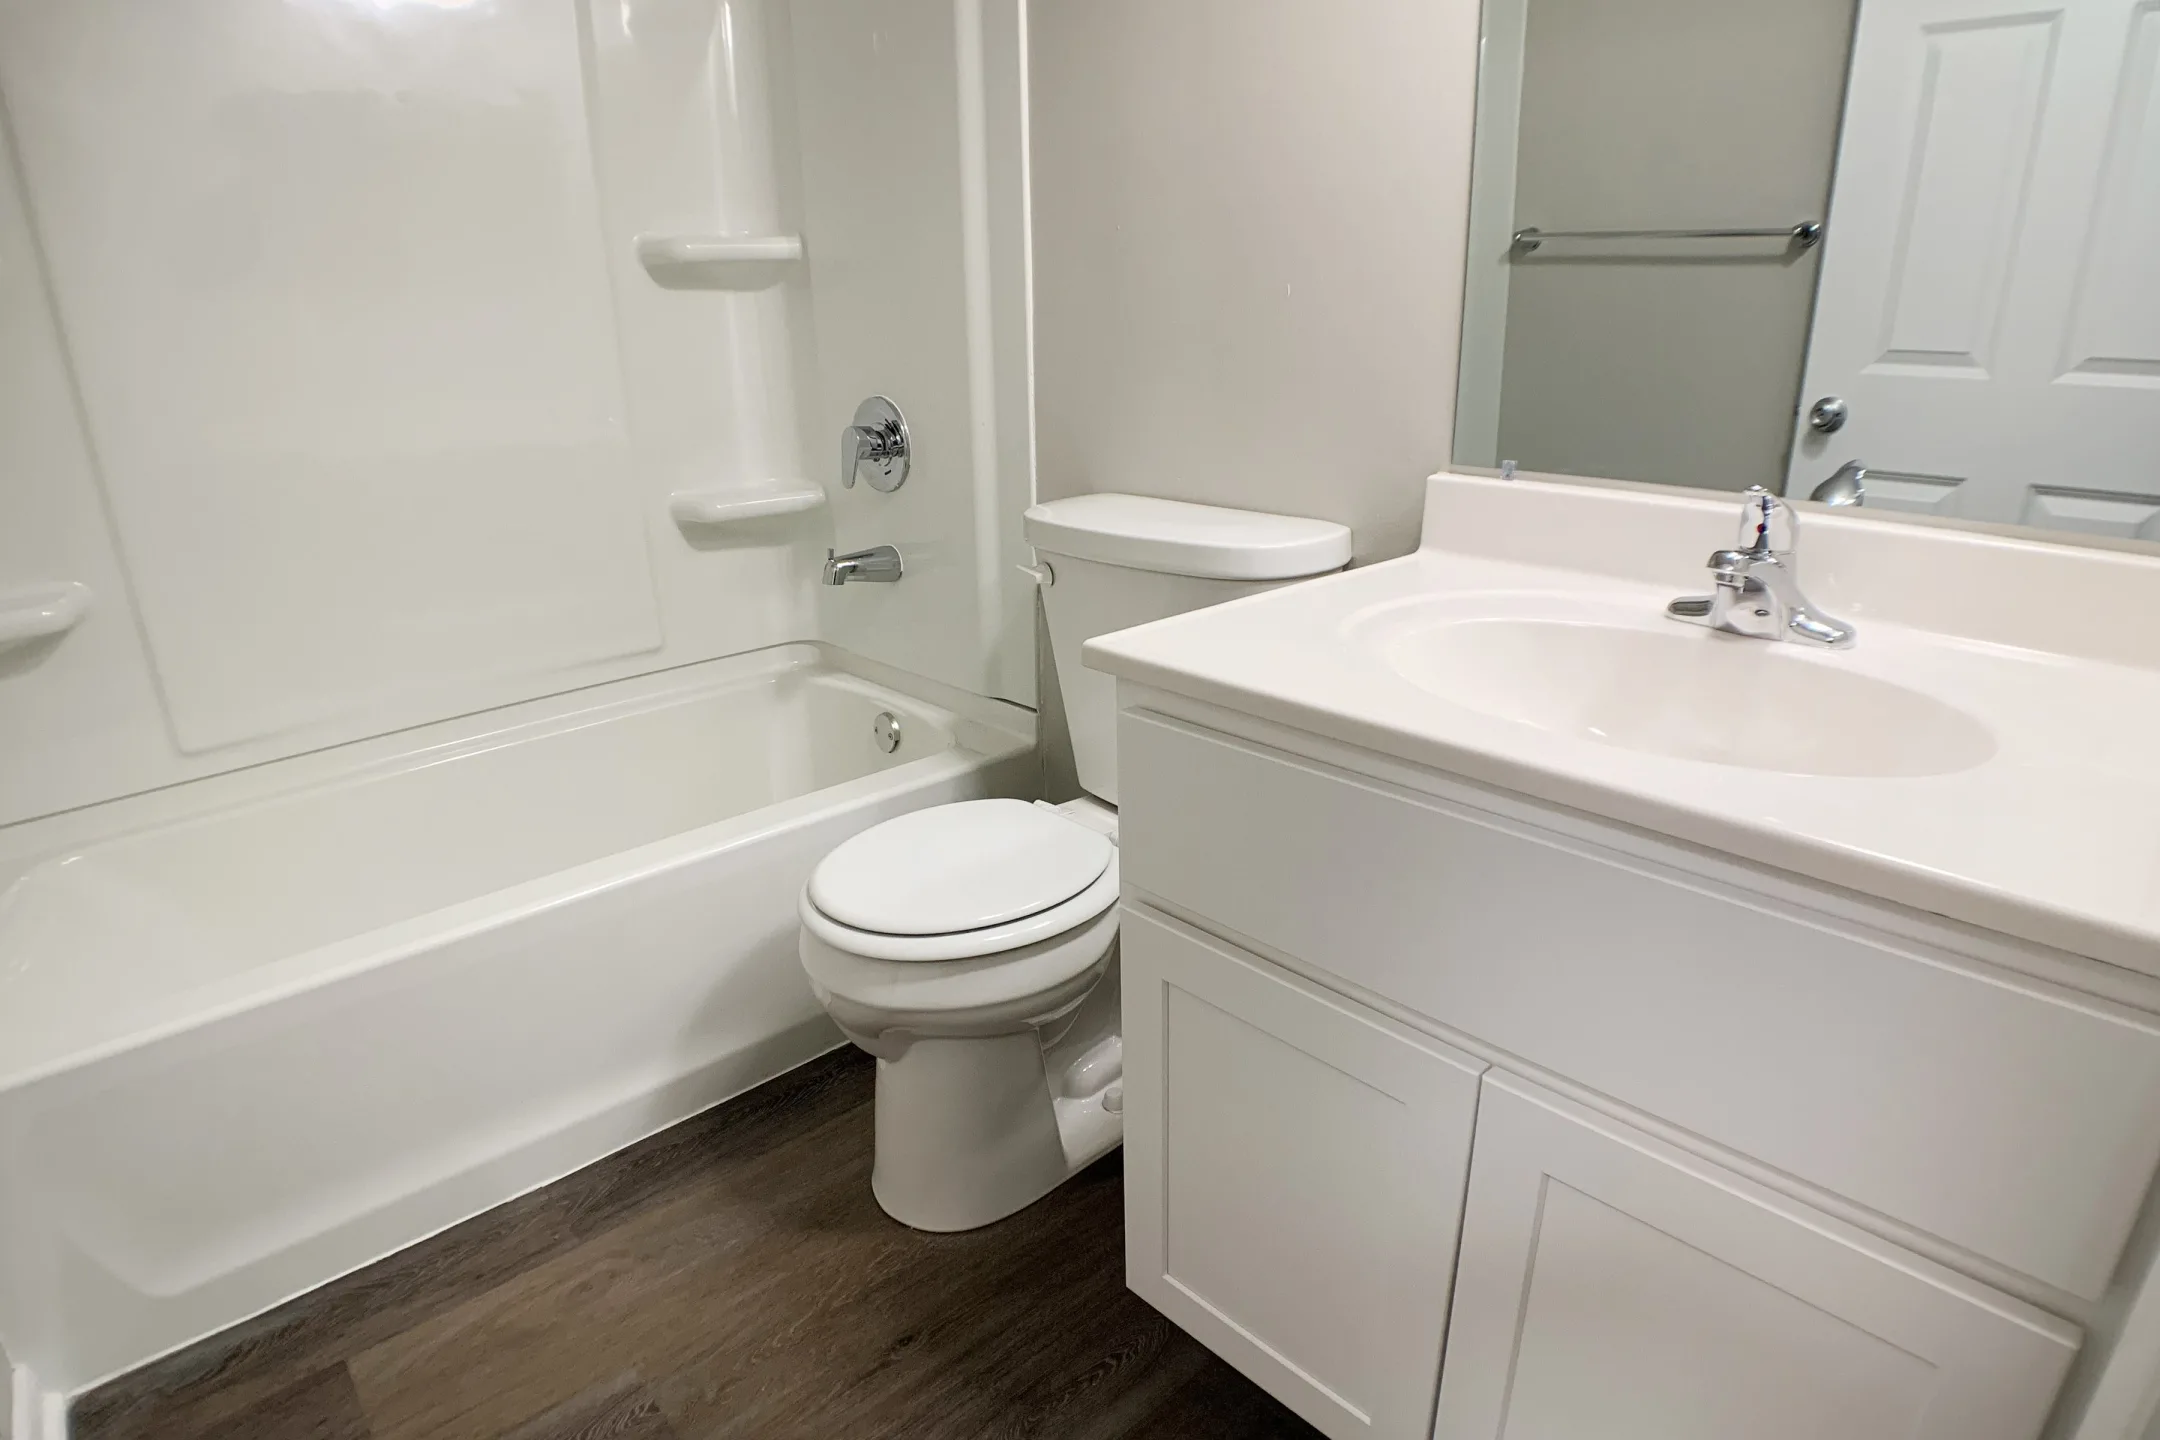 Bathroom - Miamisburg By The Mall - Miamisburg, OH